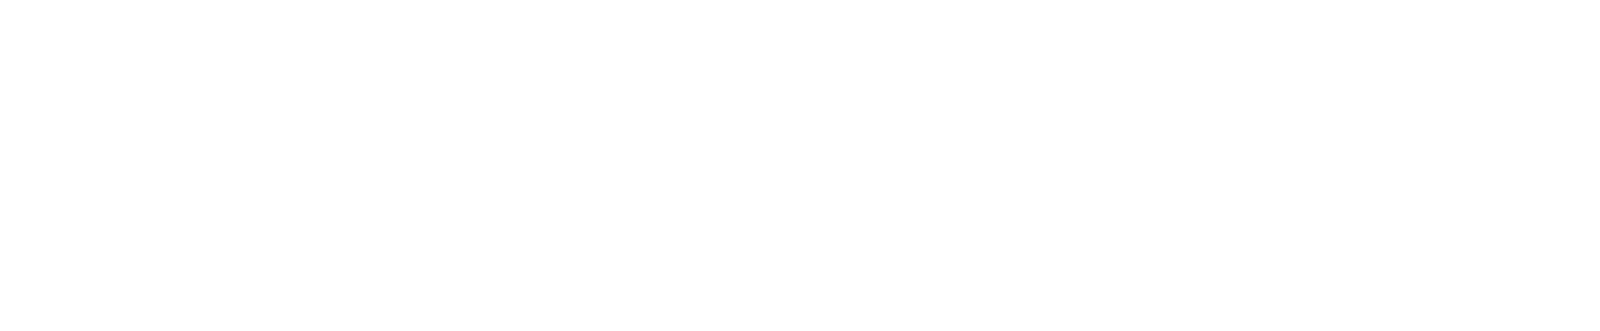 Mind-blowing uses for mayo